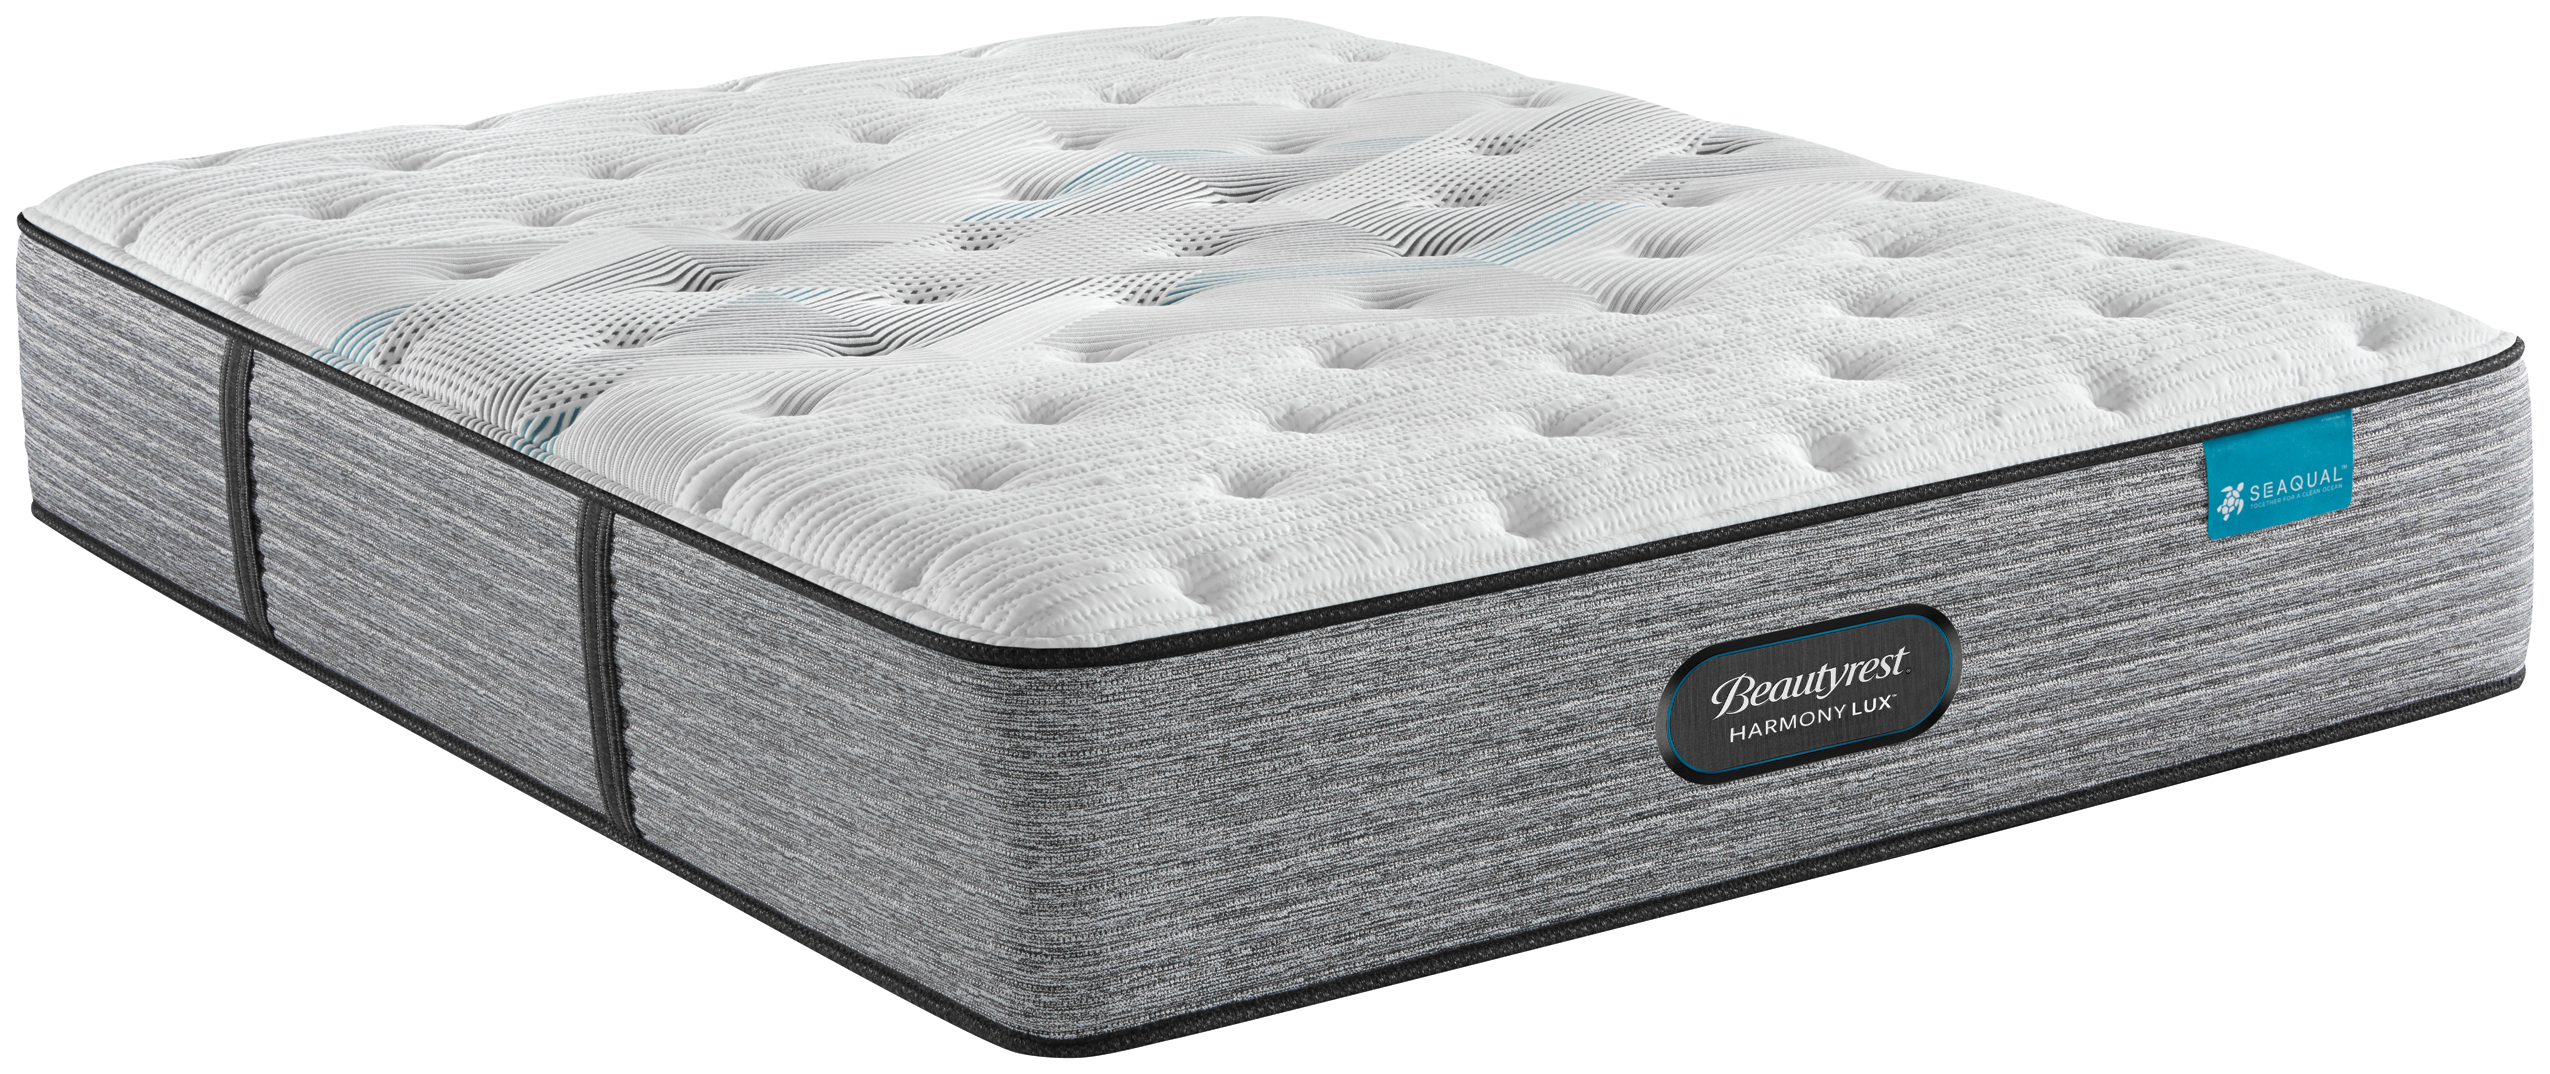 beautyrest harmony lux carbon extra firm mattress